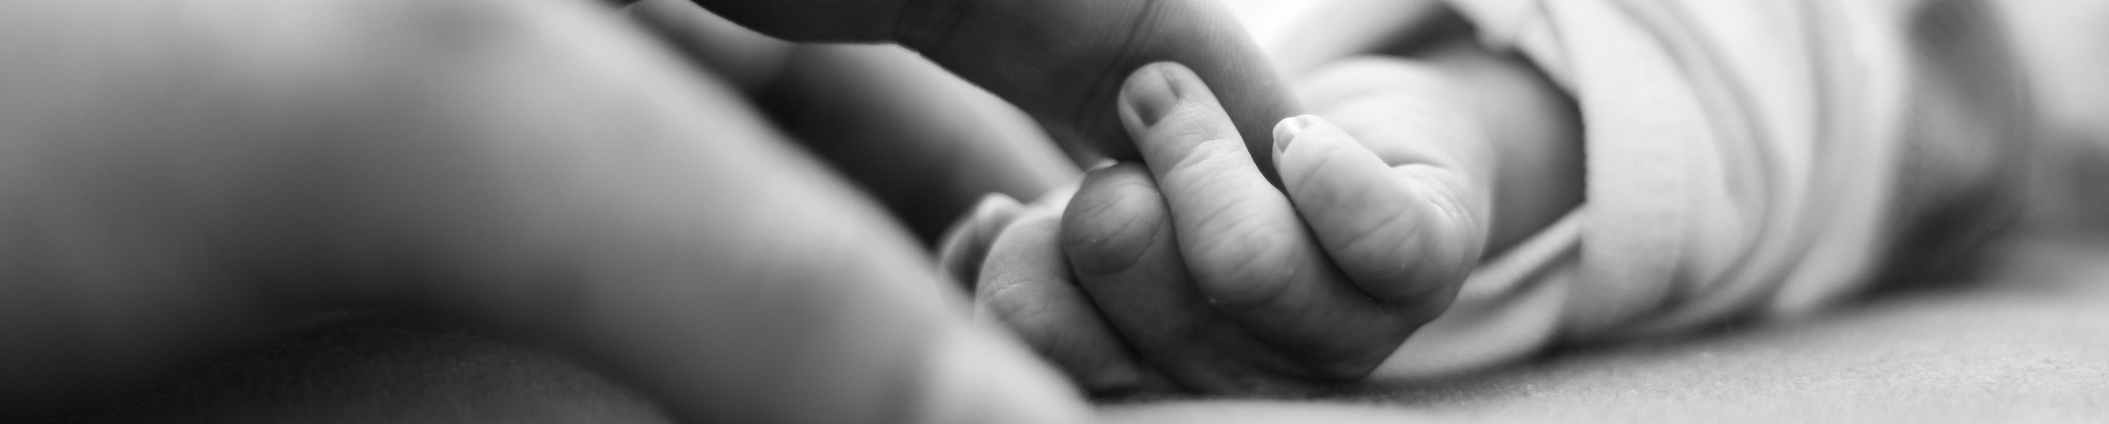 right after birth, baby is holding father's finger